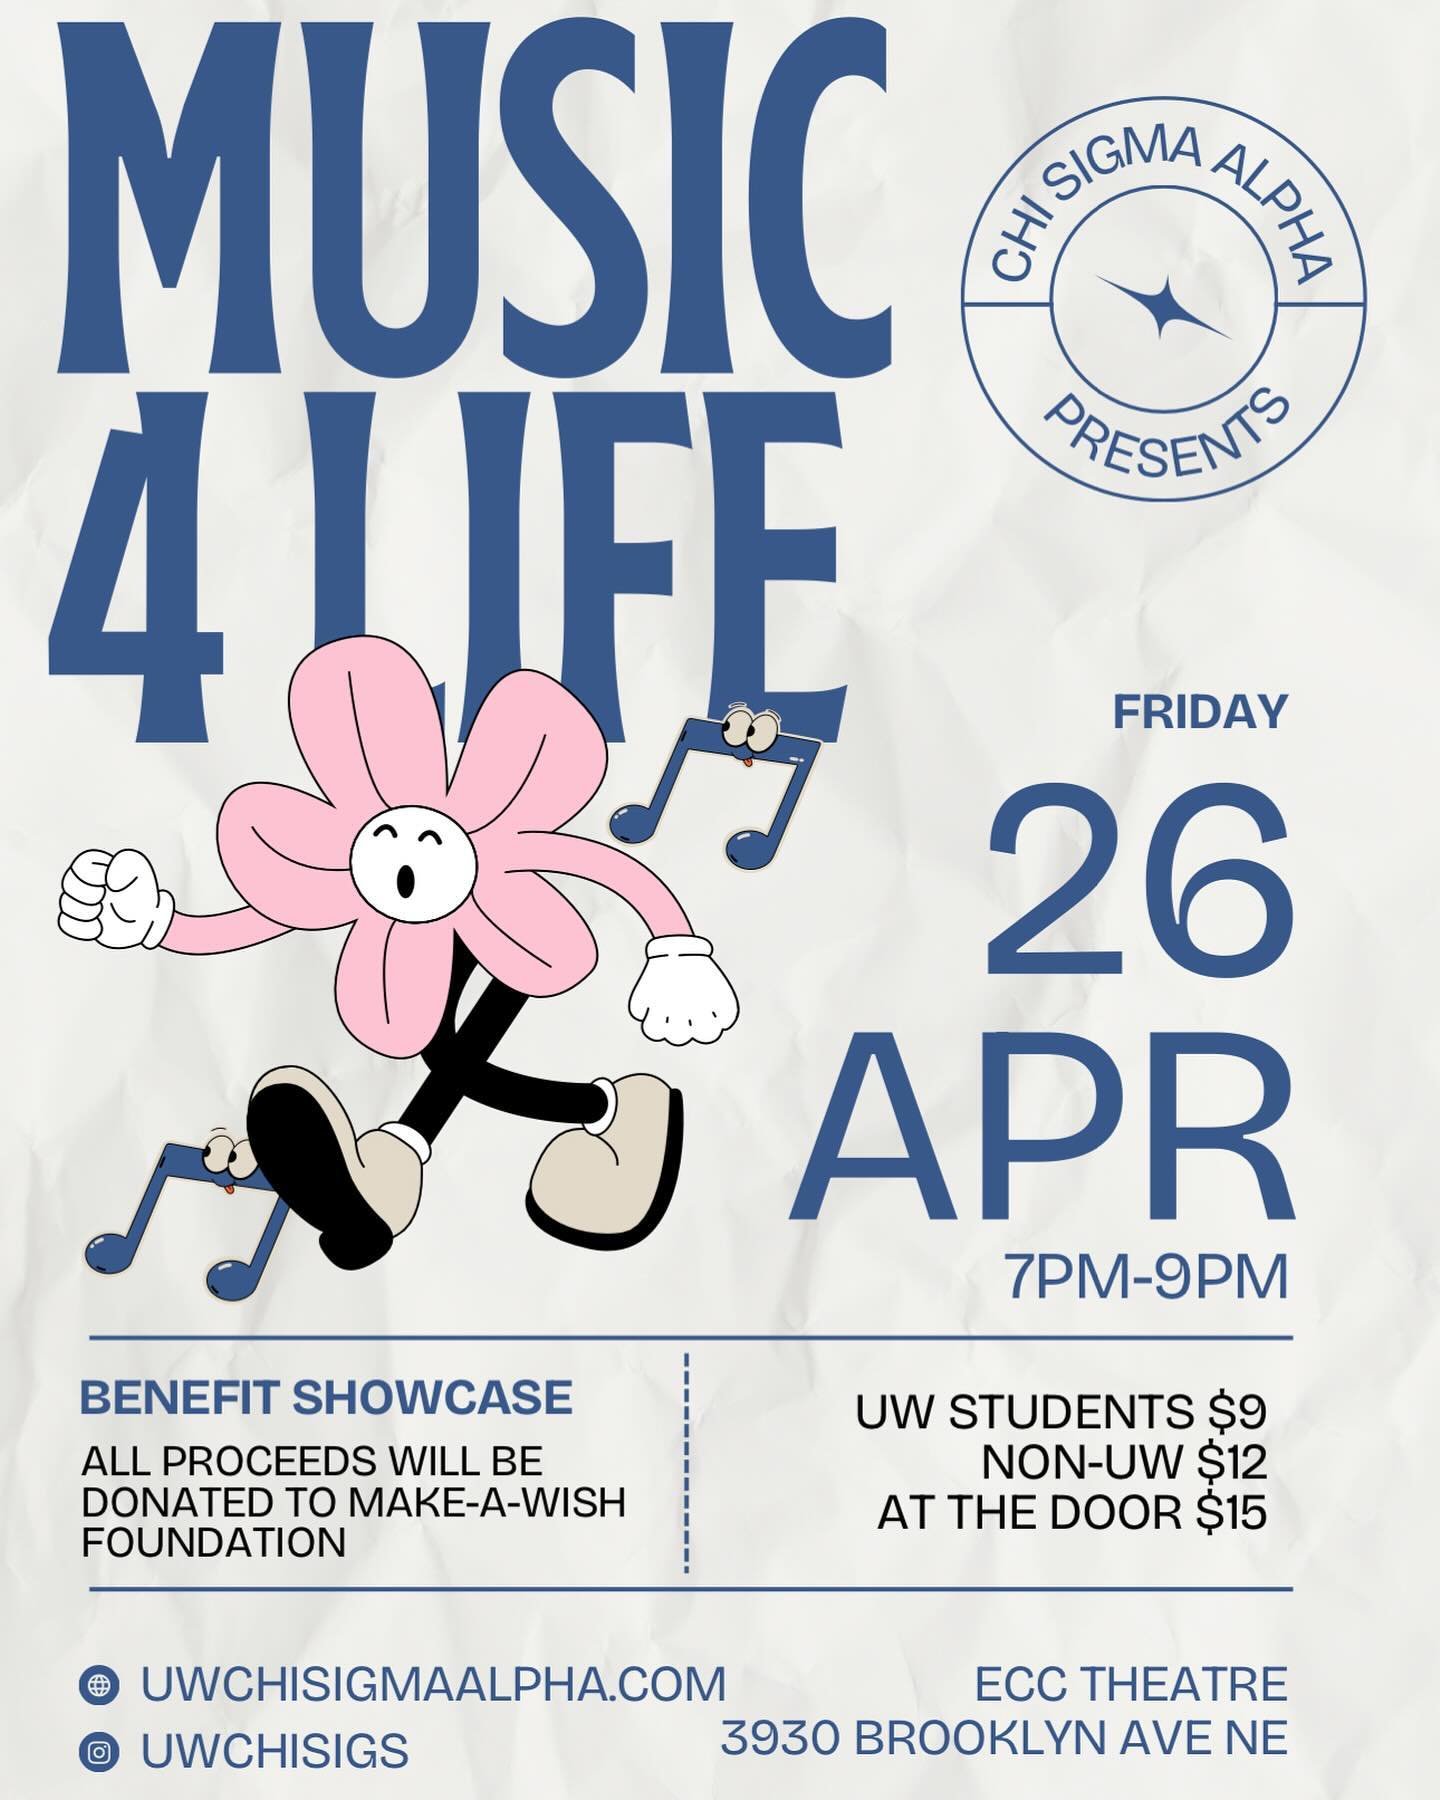 You are invited to Chi Sigma Alpha&rsquo;s annual Music 4 Life Showcase! 𓈒⟡₊⋆∘

📆 Date: April 26th, 2024 (7pm-9pm)
📍 Location: Kelly E. Samuel Ethnic Cultural Theater
🚪 Doors open at 6:45pm
🎫 Tickets are available via the link in our bio!

Music